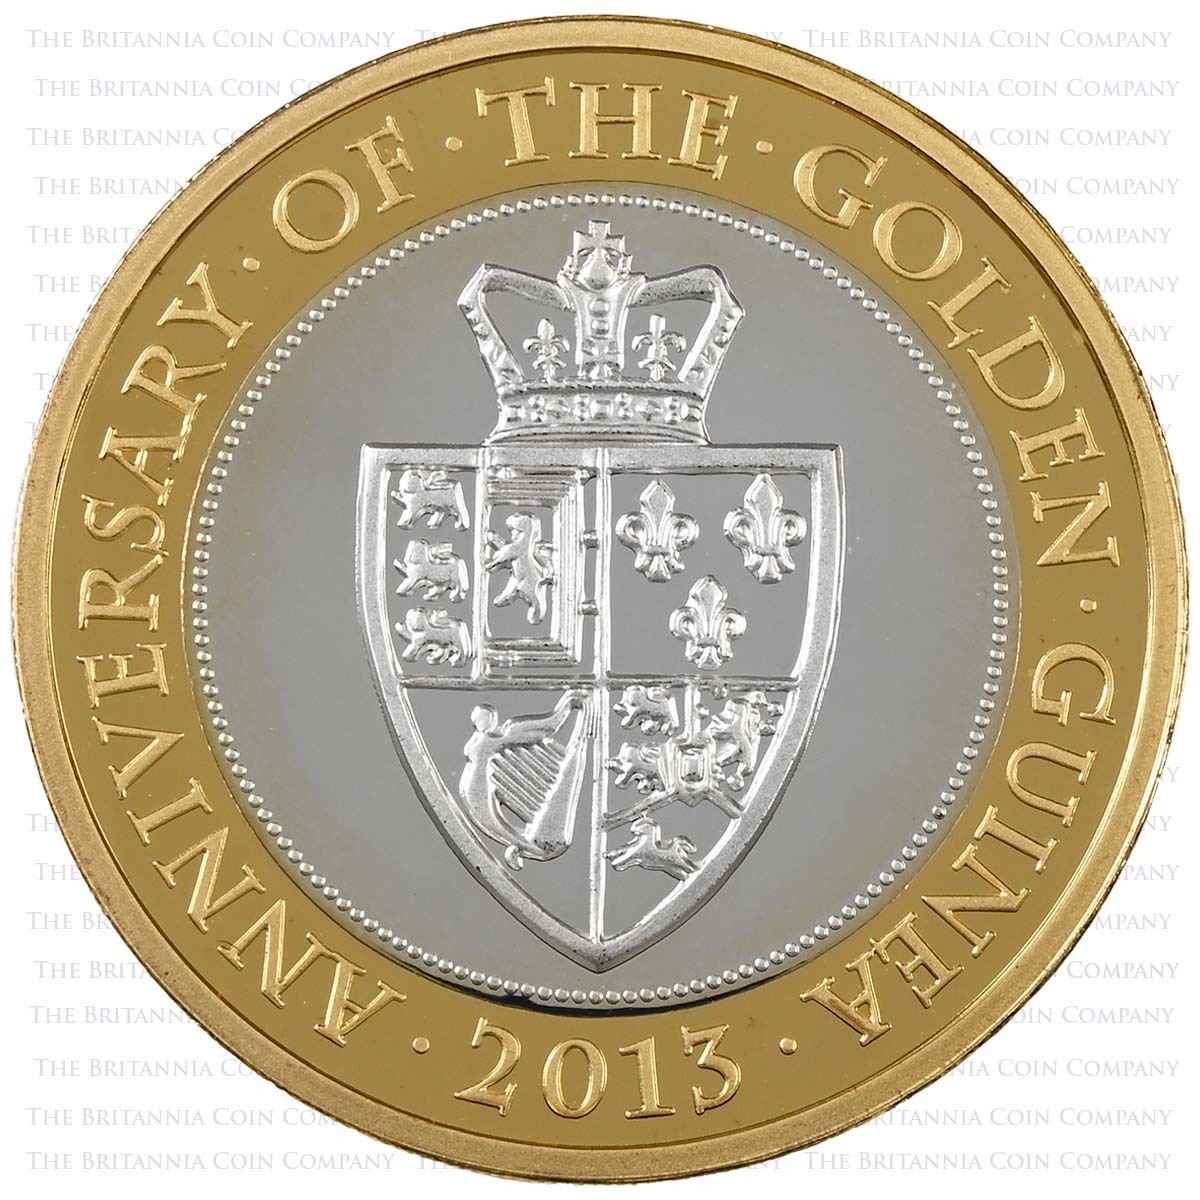 UK13GUSP 2013 Golden Guinea Two Pound Silver Proof Coin Reverse